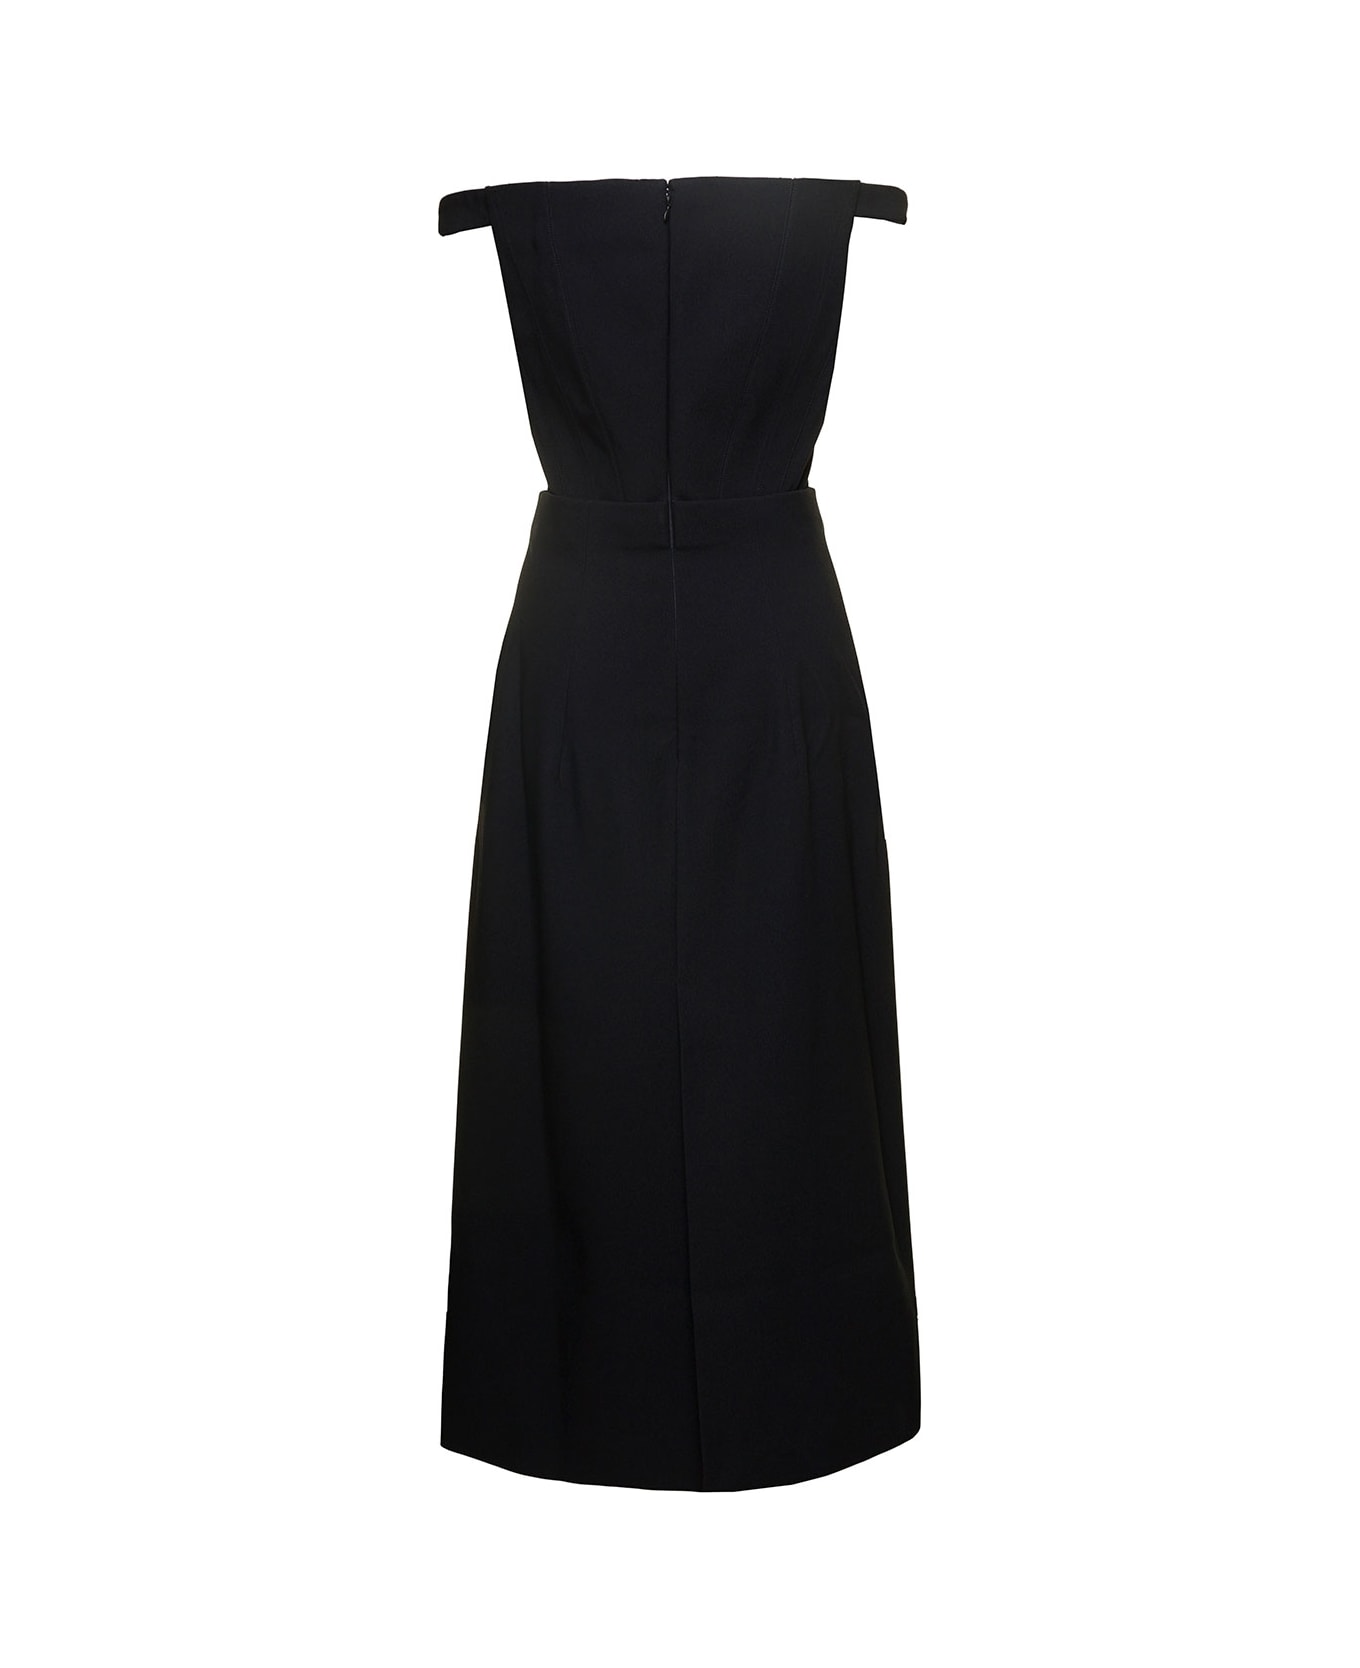 Solace London Black Midi Dress With Flared Skirt And Asymmetric Vent In Polyester Woman - Black